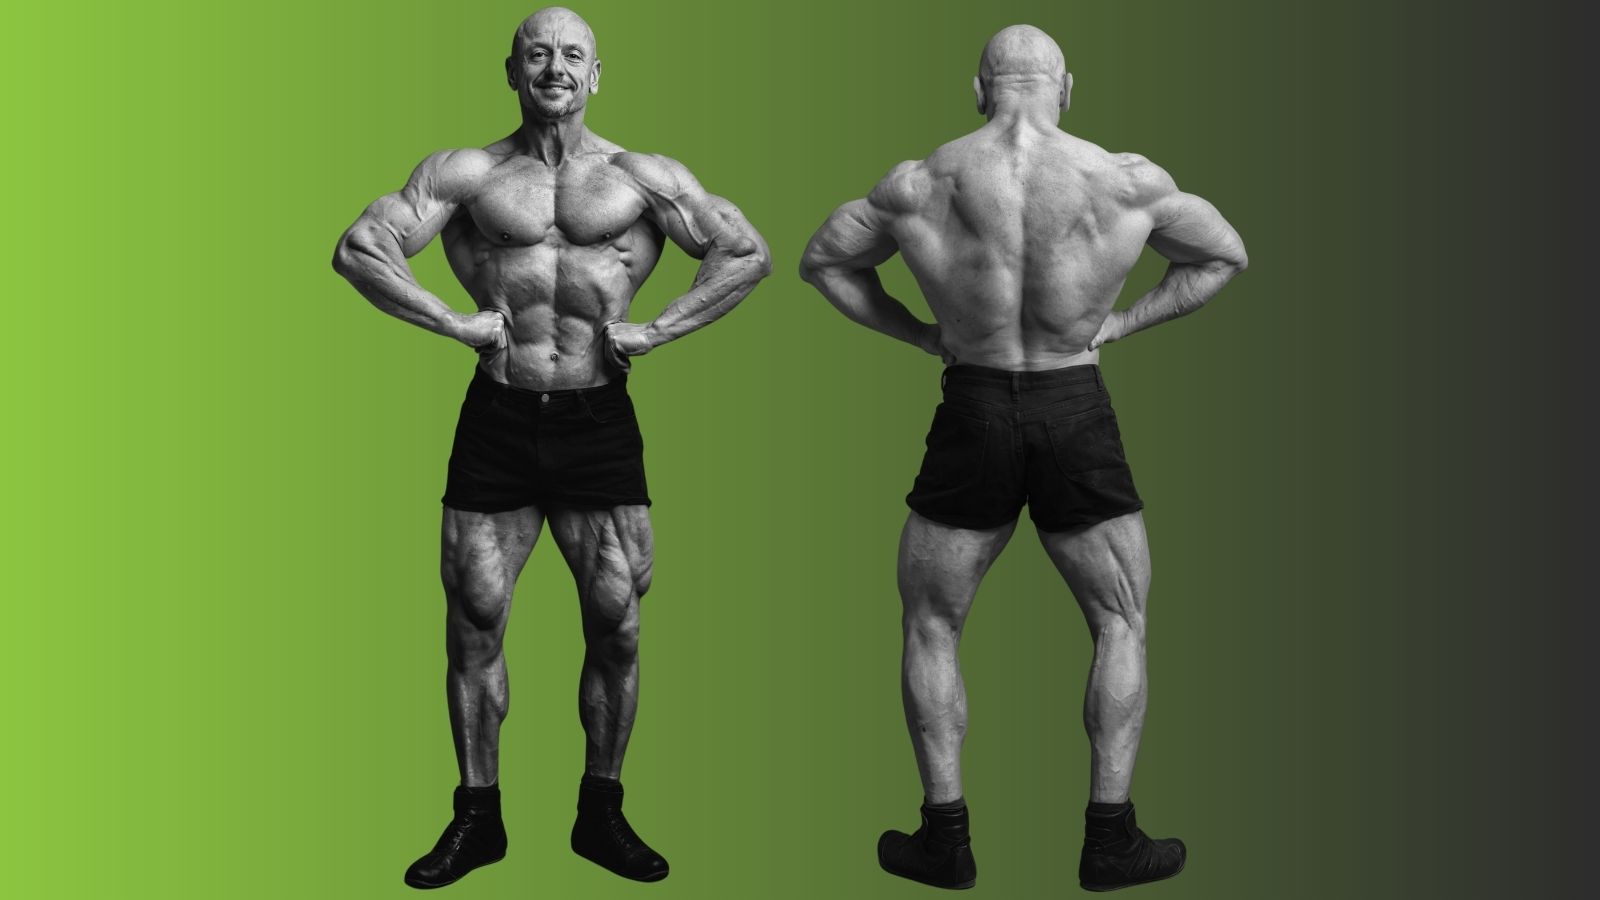 The Definitive Guide on How to Lat Spread Like a Pro Bodybuilder